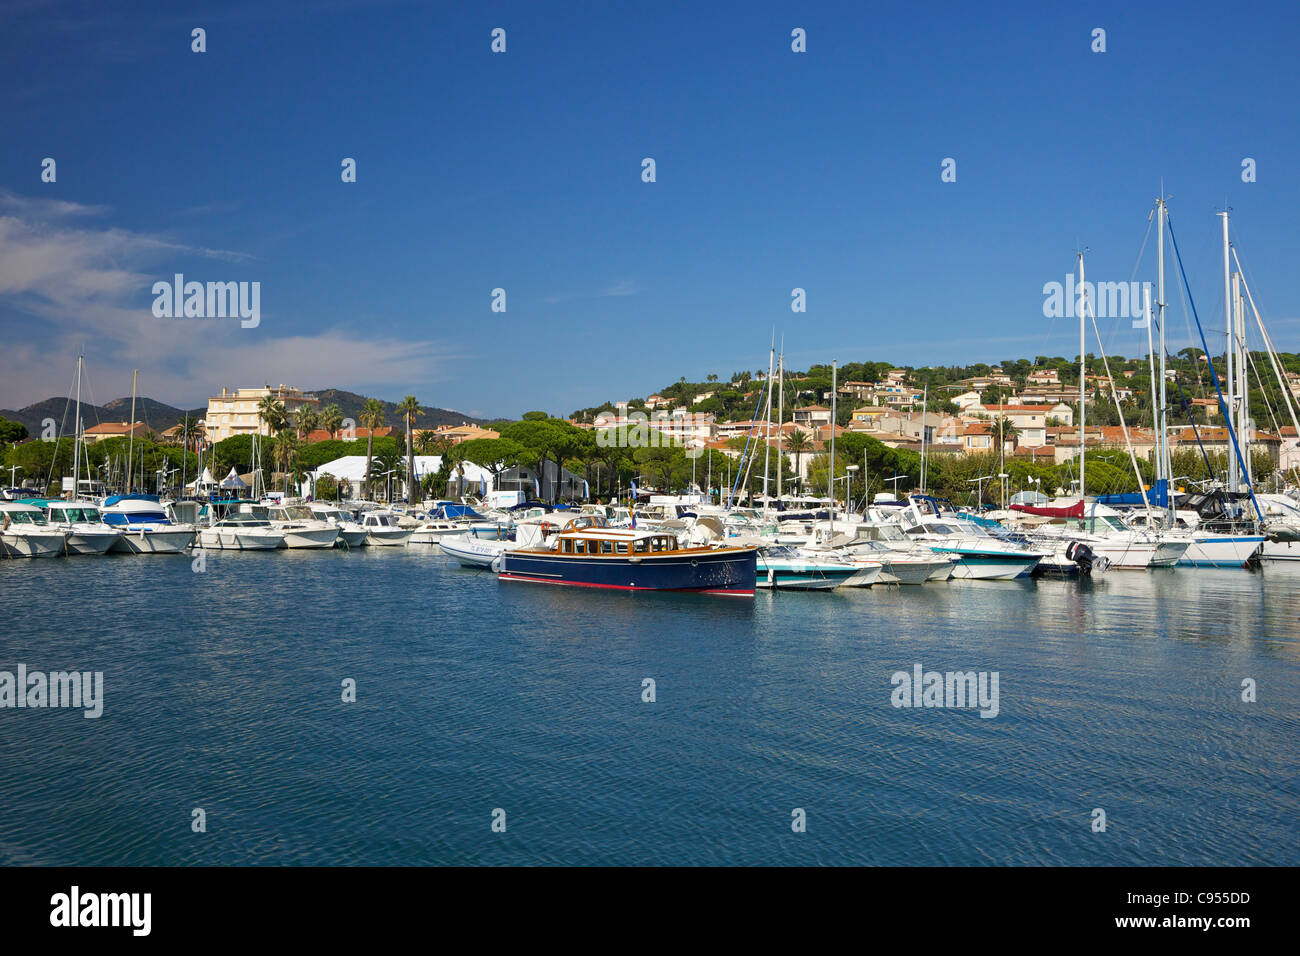 Sainte-Maxime harbour viewed from the sea, Var, Provence, Cote d'Azur, France Stock Photo